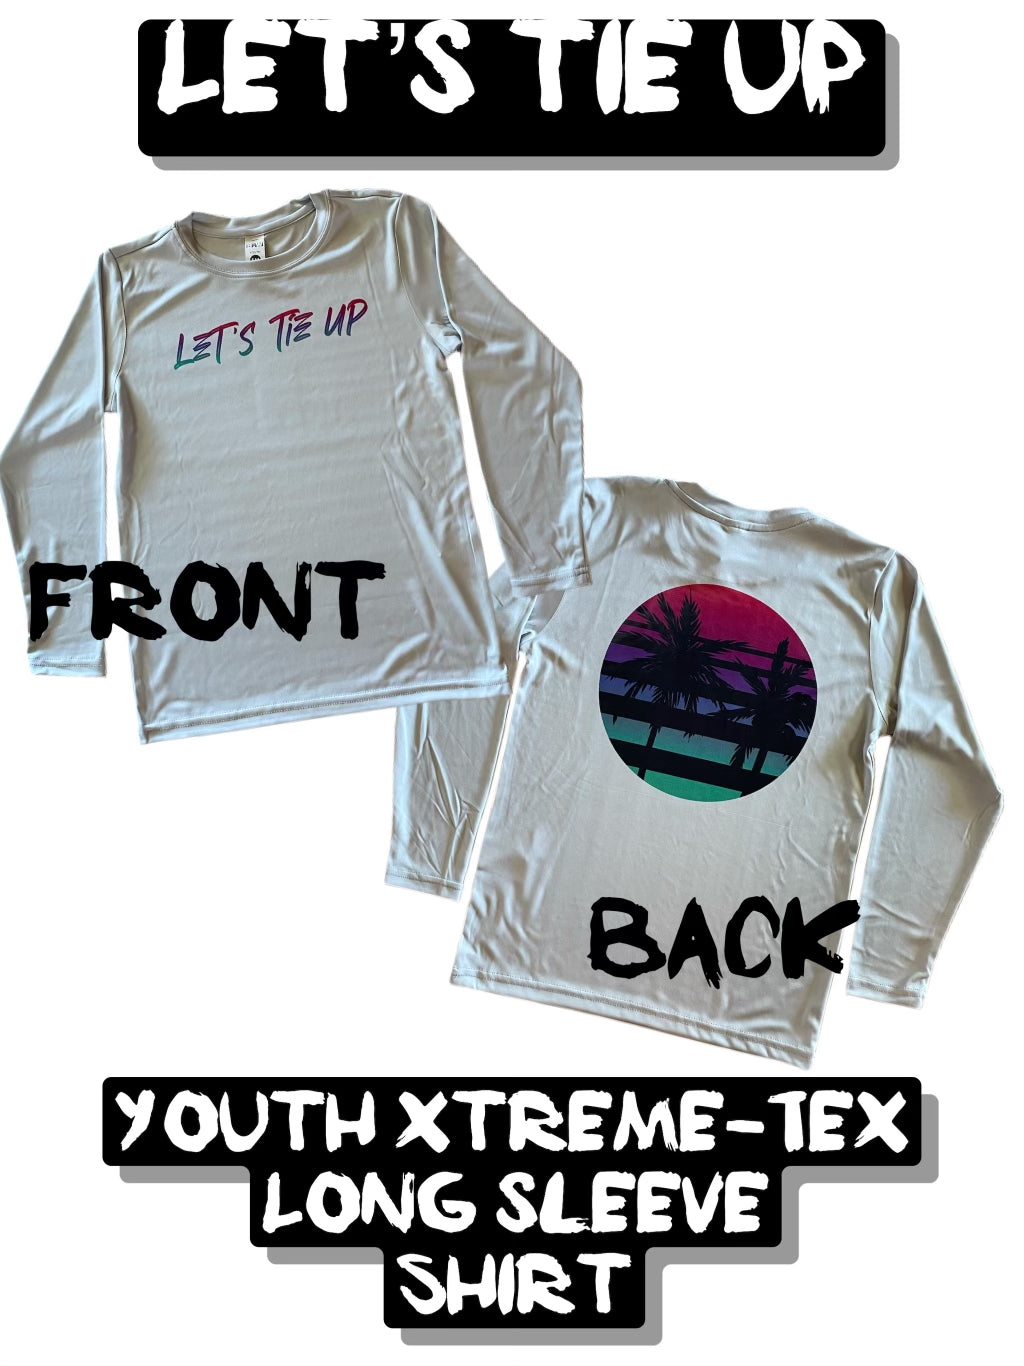 Youth Xtreme-Tex Cool Touch Sun Shirt